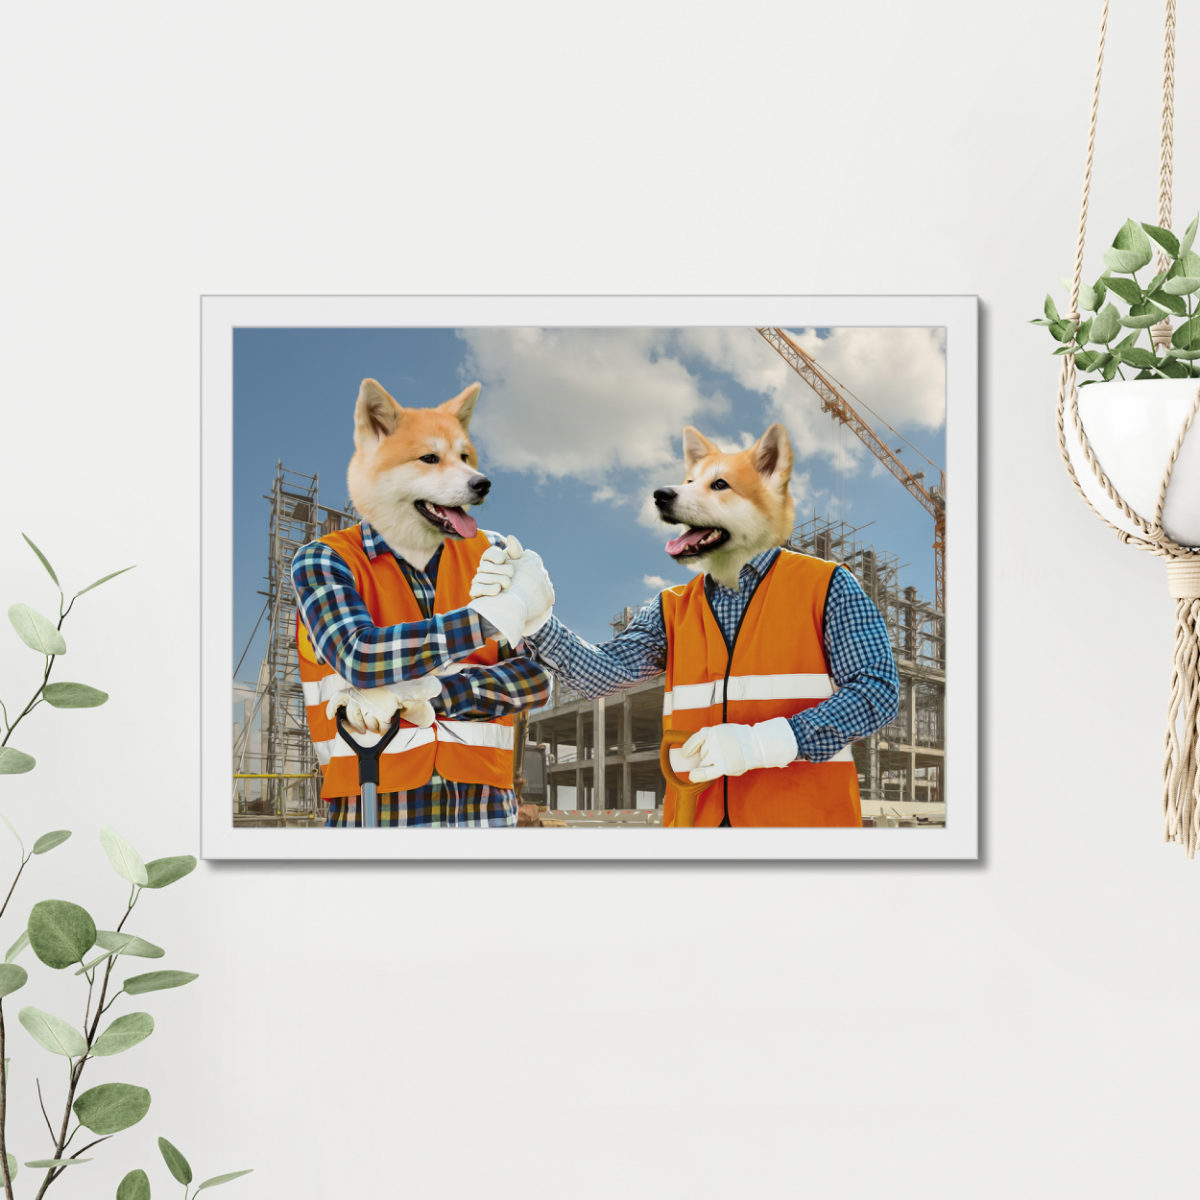 The Construction Workmates: Custom Pet Portrait - Paw & Glory, paw and glory, dog portraits admiral, animal portrait pictures, drawing pictures of pets, admiral dog portrait, custom pet paintings, custom pet painting, pet portraits